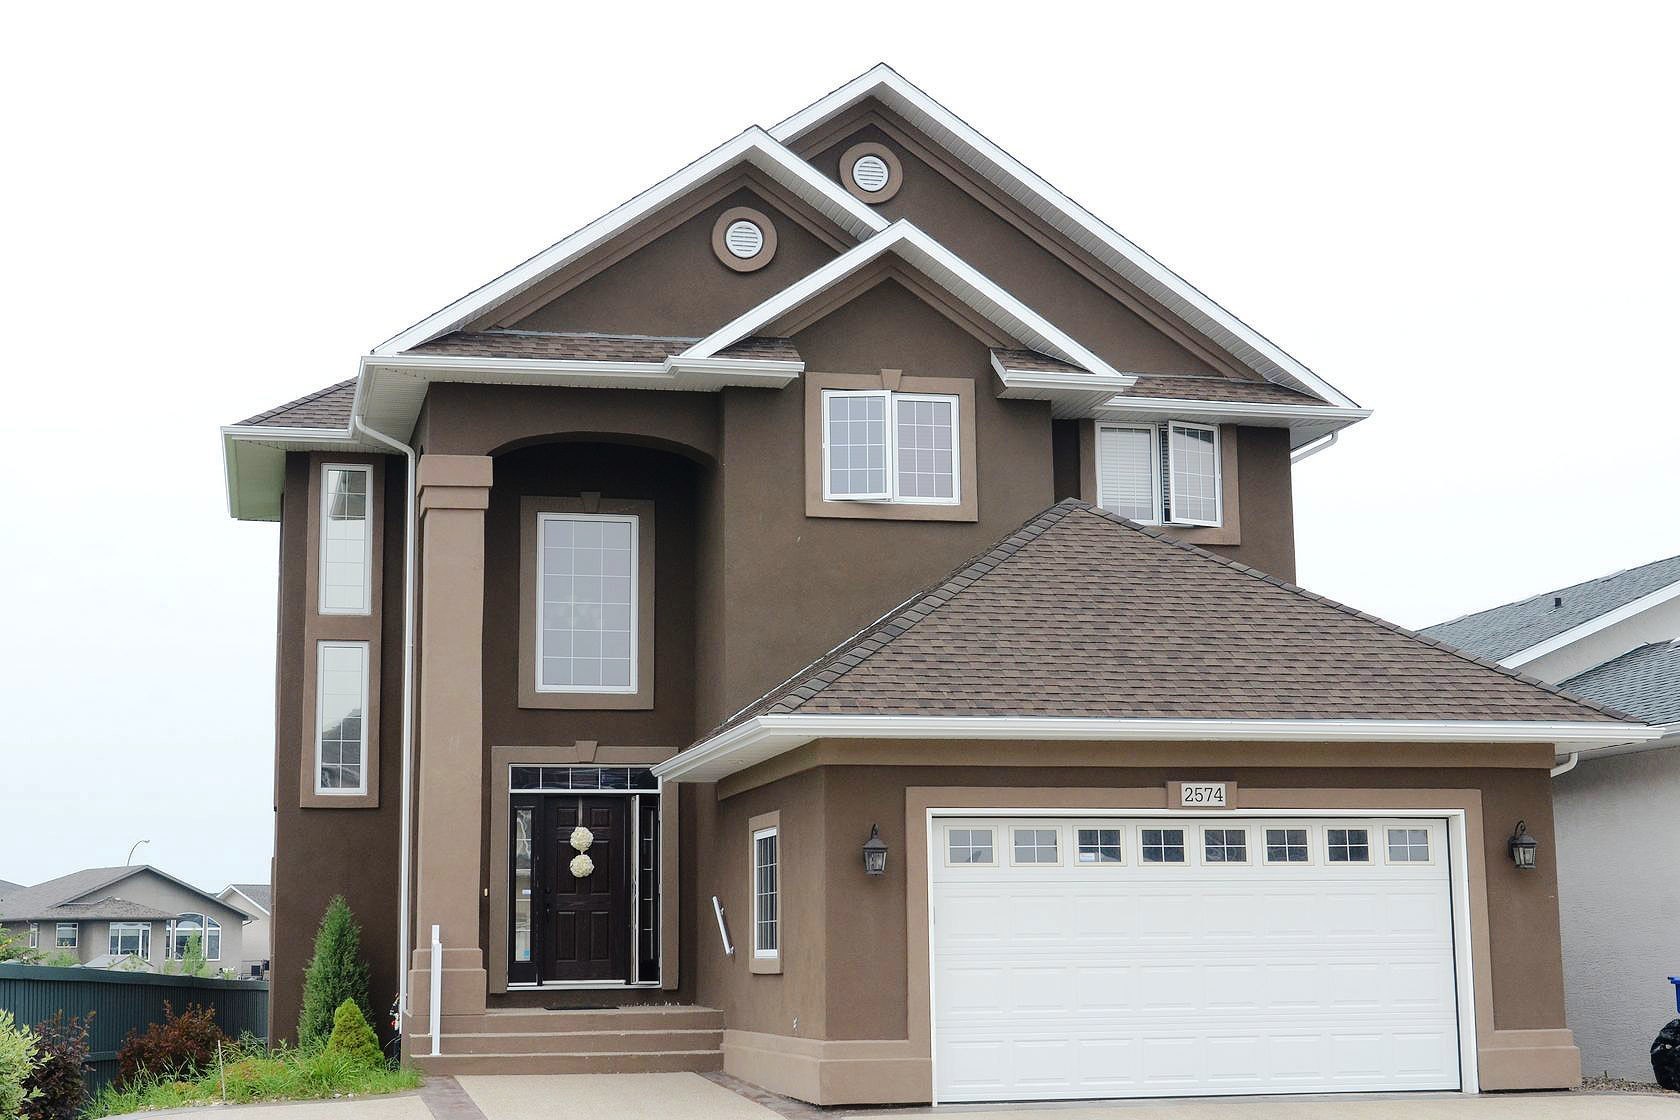 Edmonton Homes For Sale! Use Enhanced Search Tools to Find Your Dream Home!